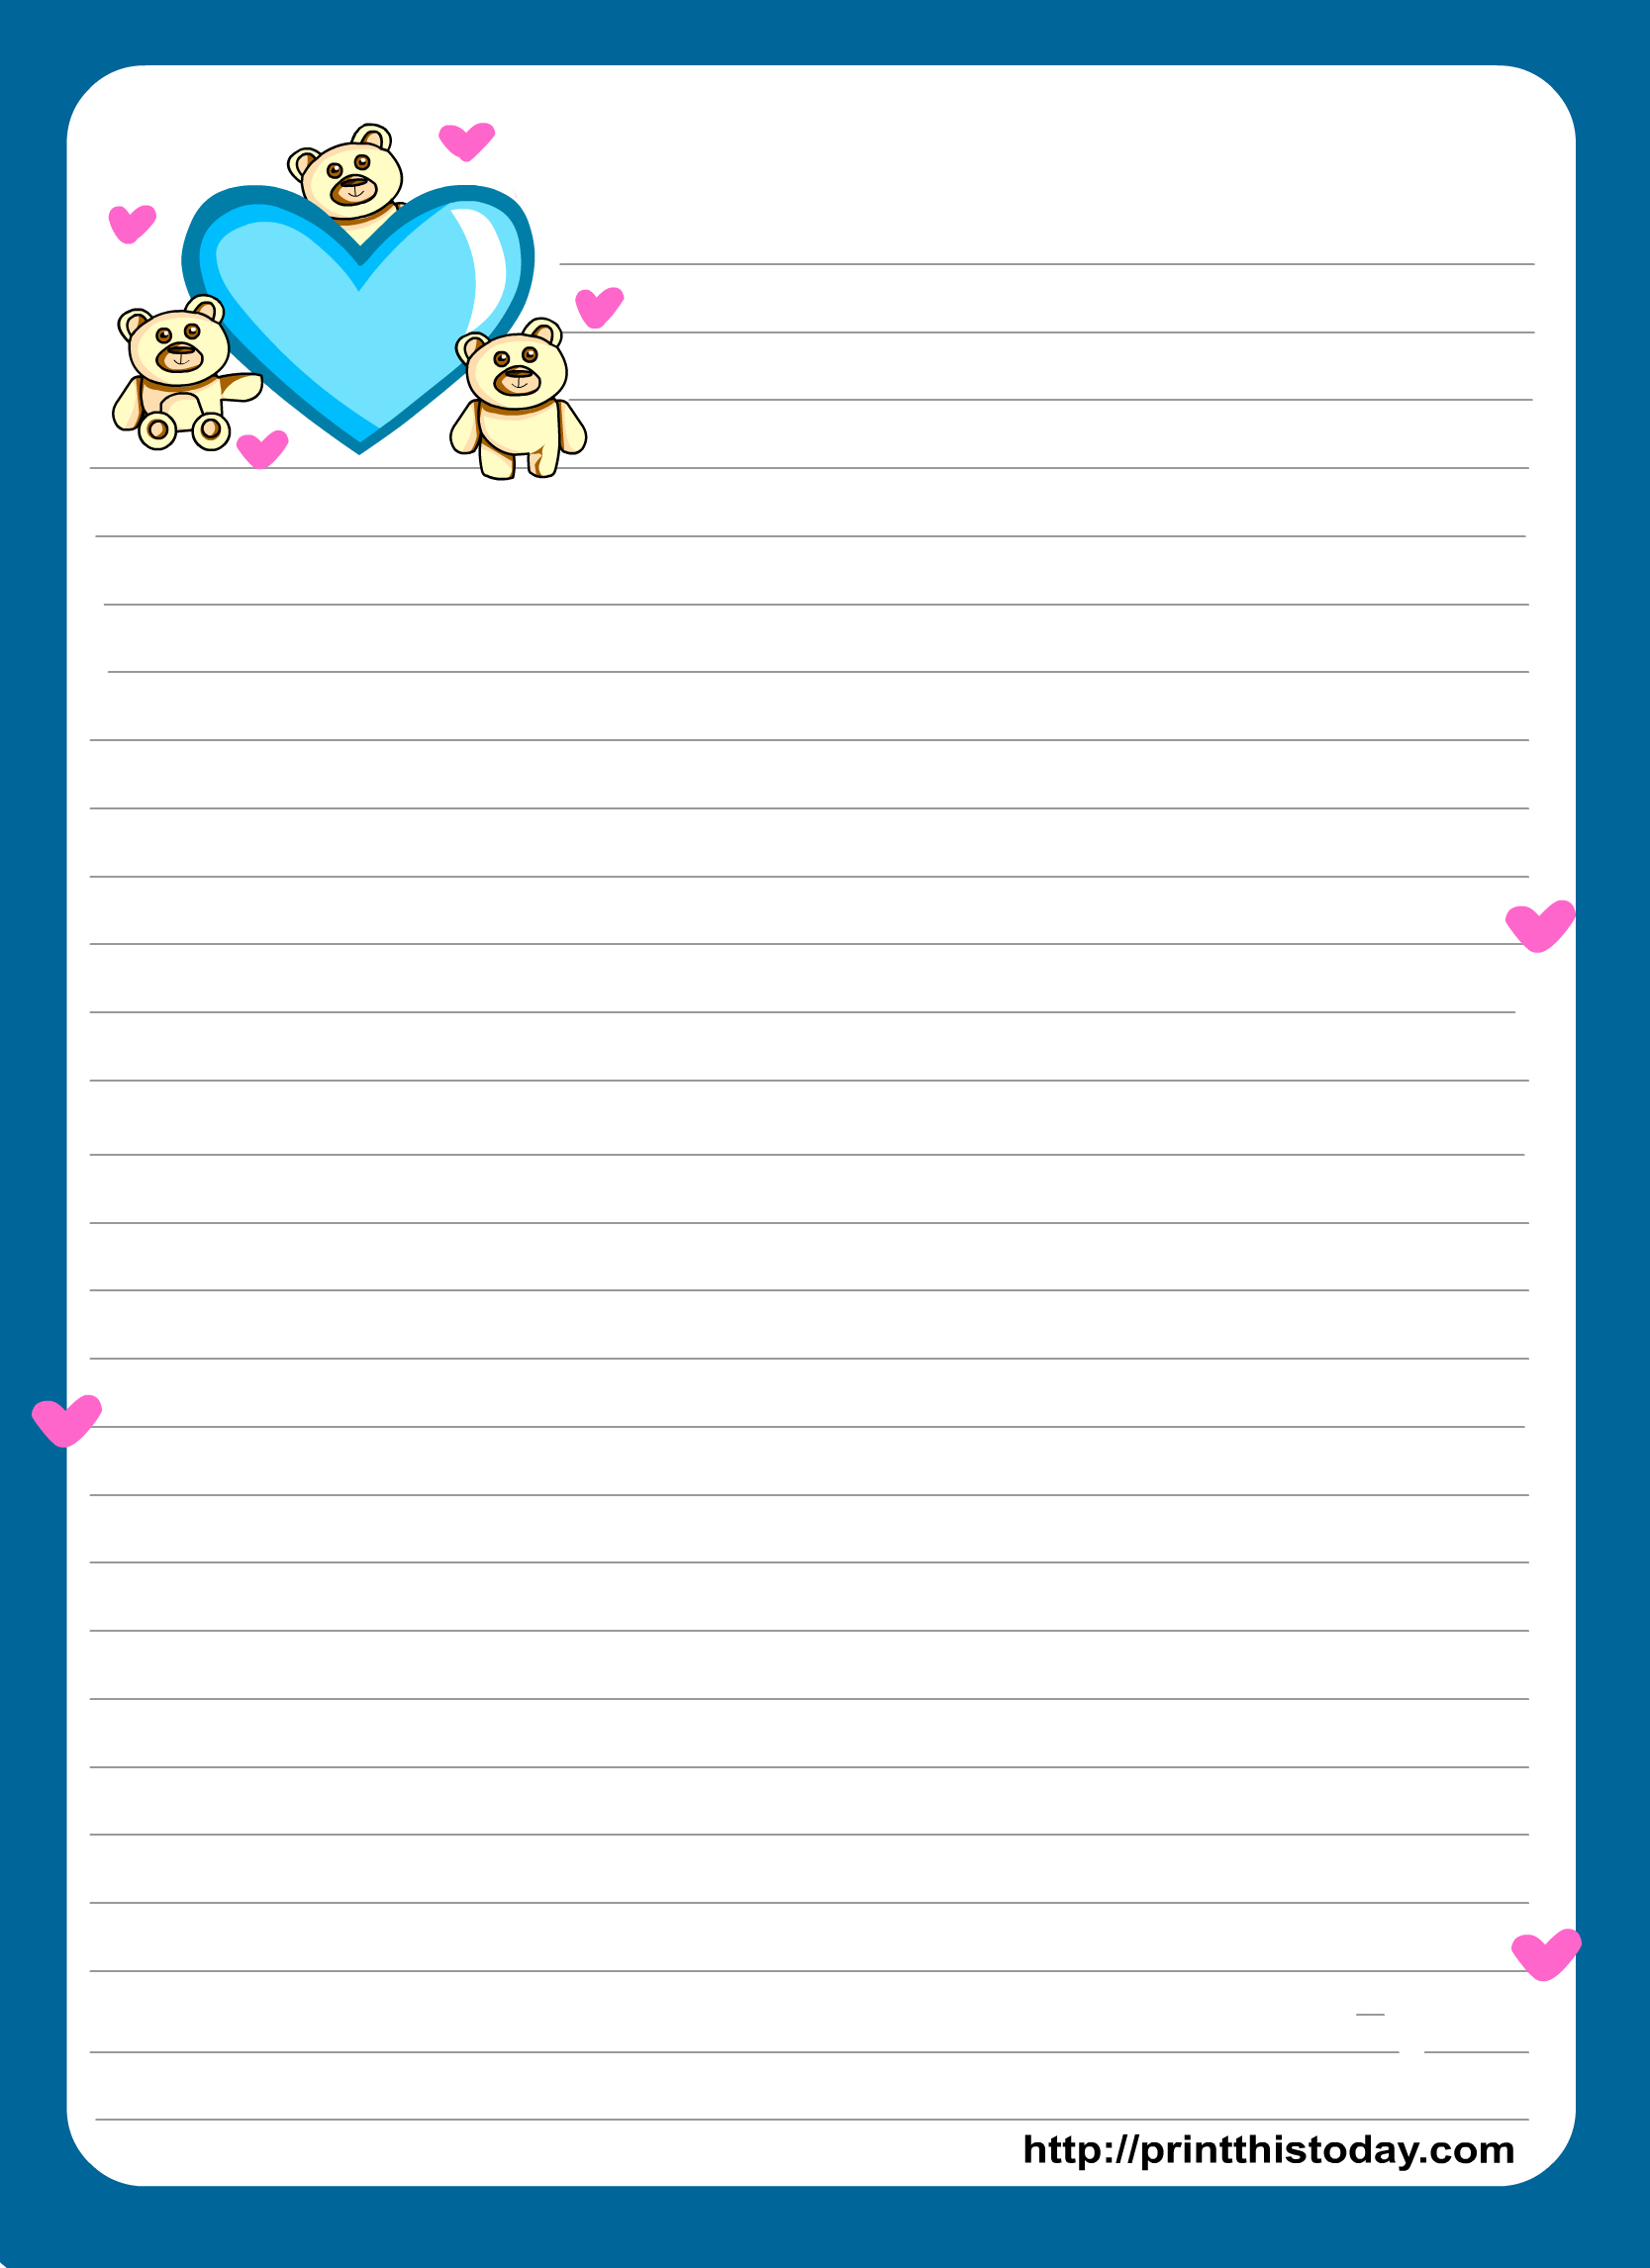 Miss You Love Letter Pad Stationery | Lined Stationery | Free - Free Printable Stationary With Lines